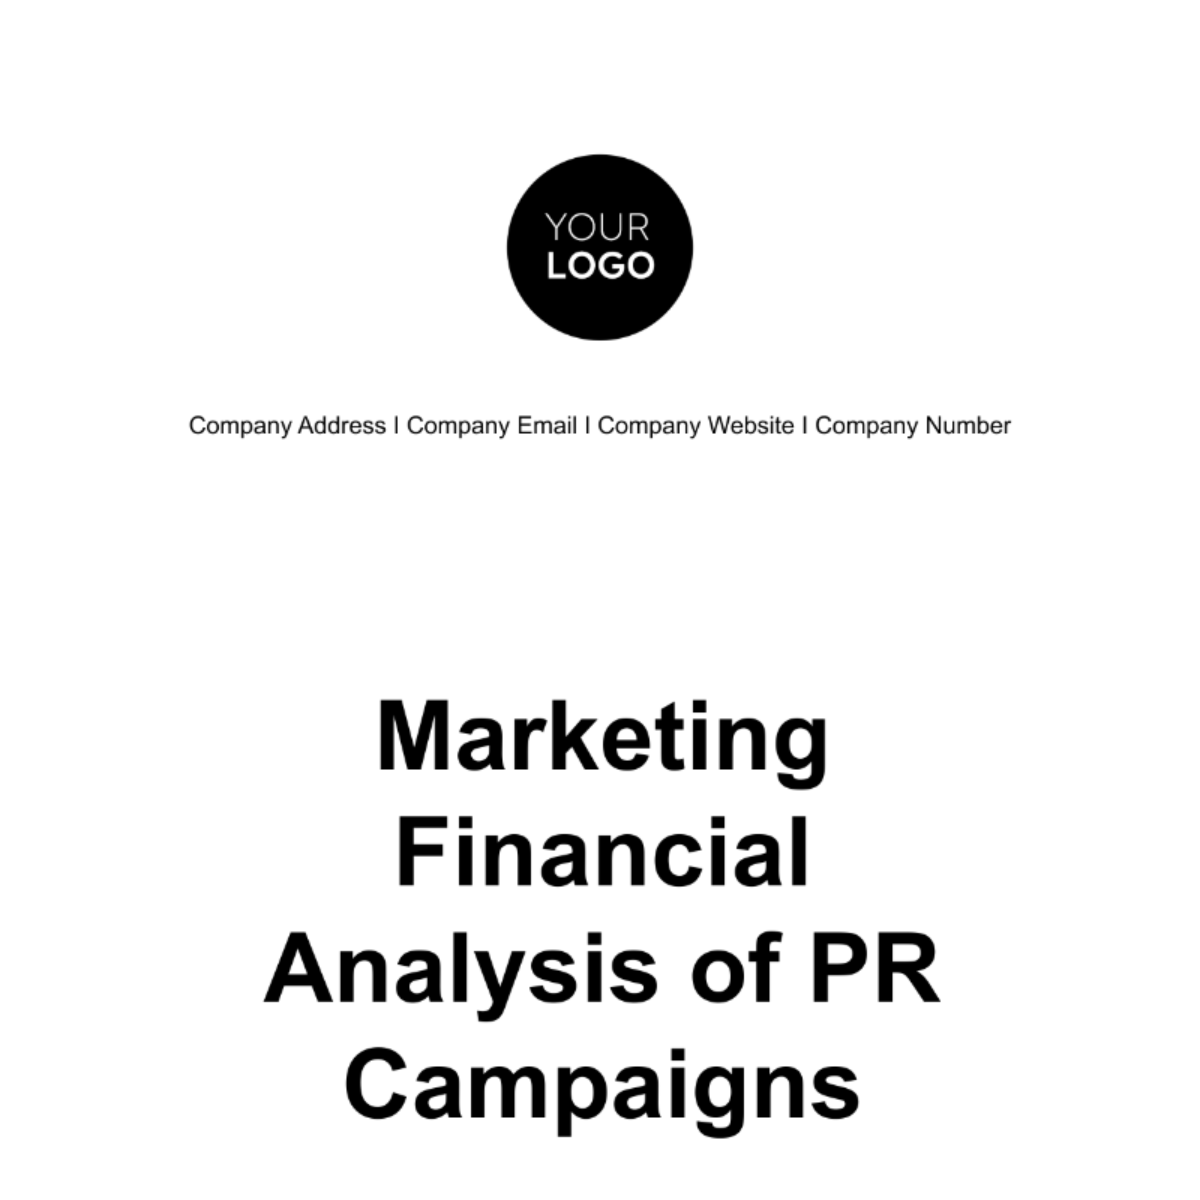 Marketing Financial Analysis of PR Campaigns Template